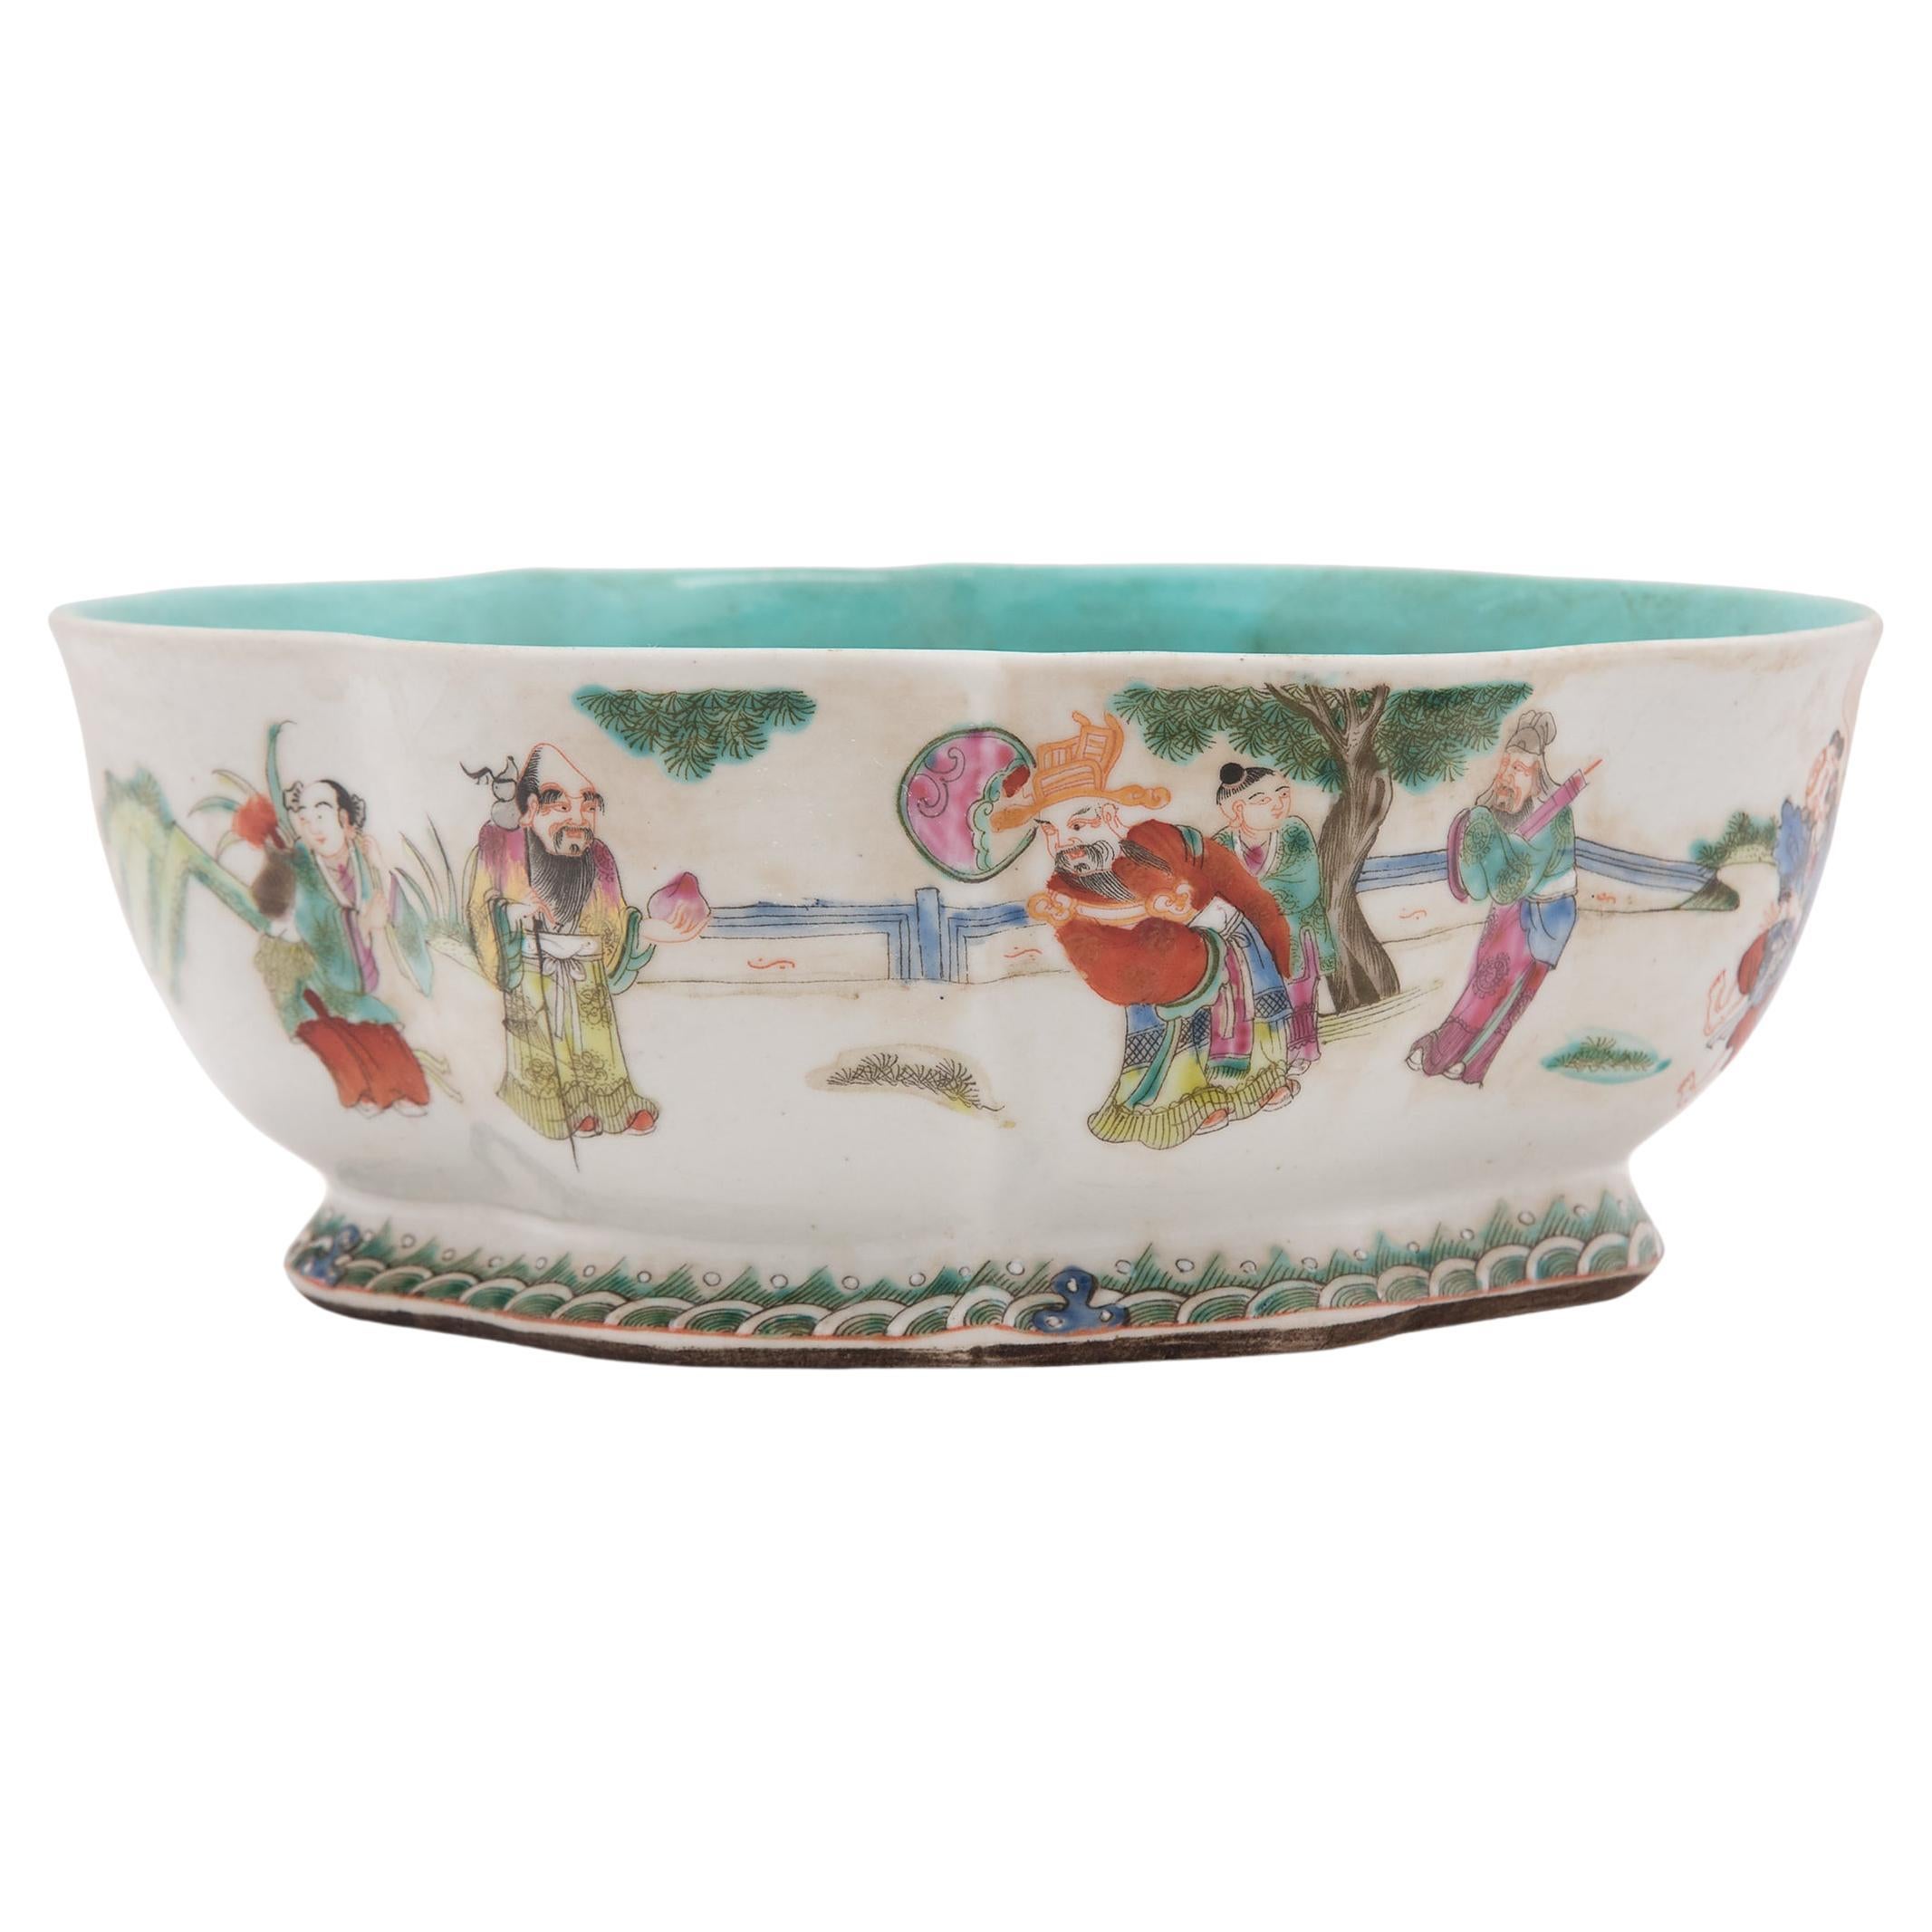 Chinese Footed Offering Bowl with Gathering of Immortals, c. 1900